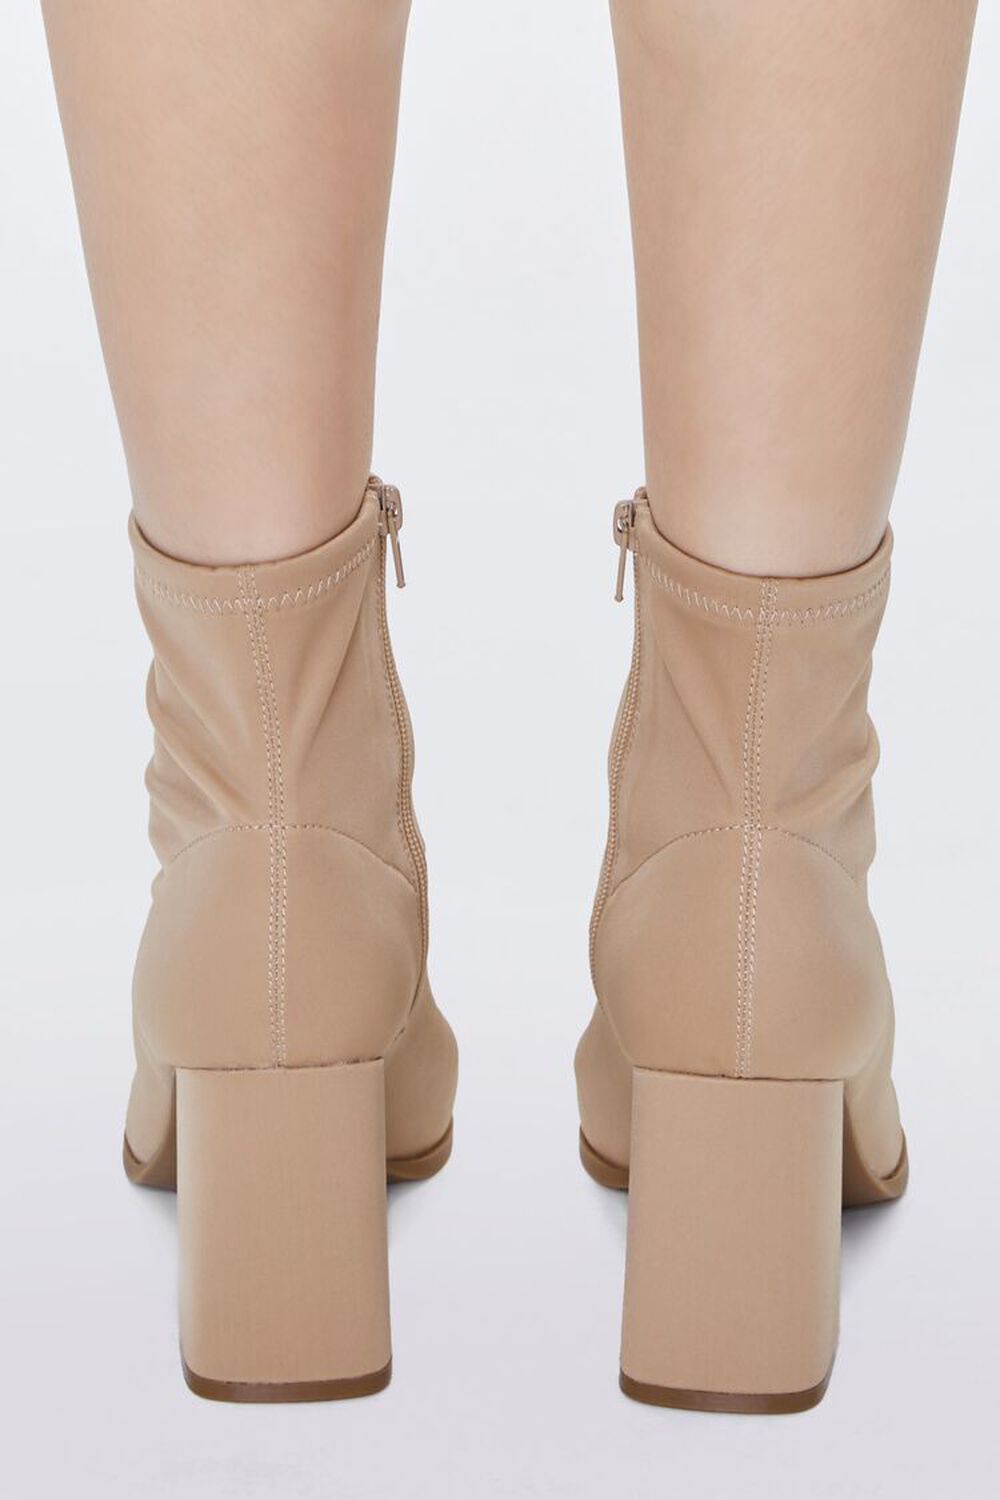 TAUPE Faux Leather Zip-Up Booties, image 3